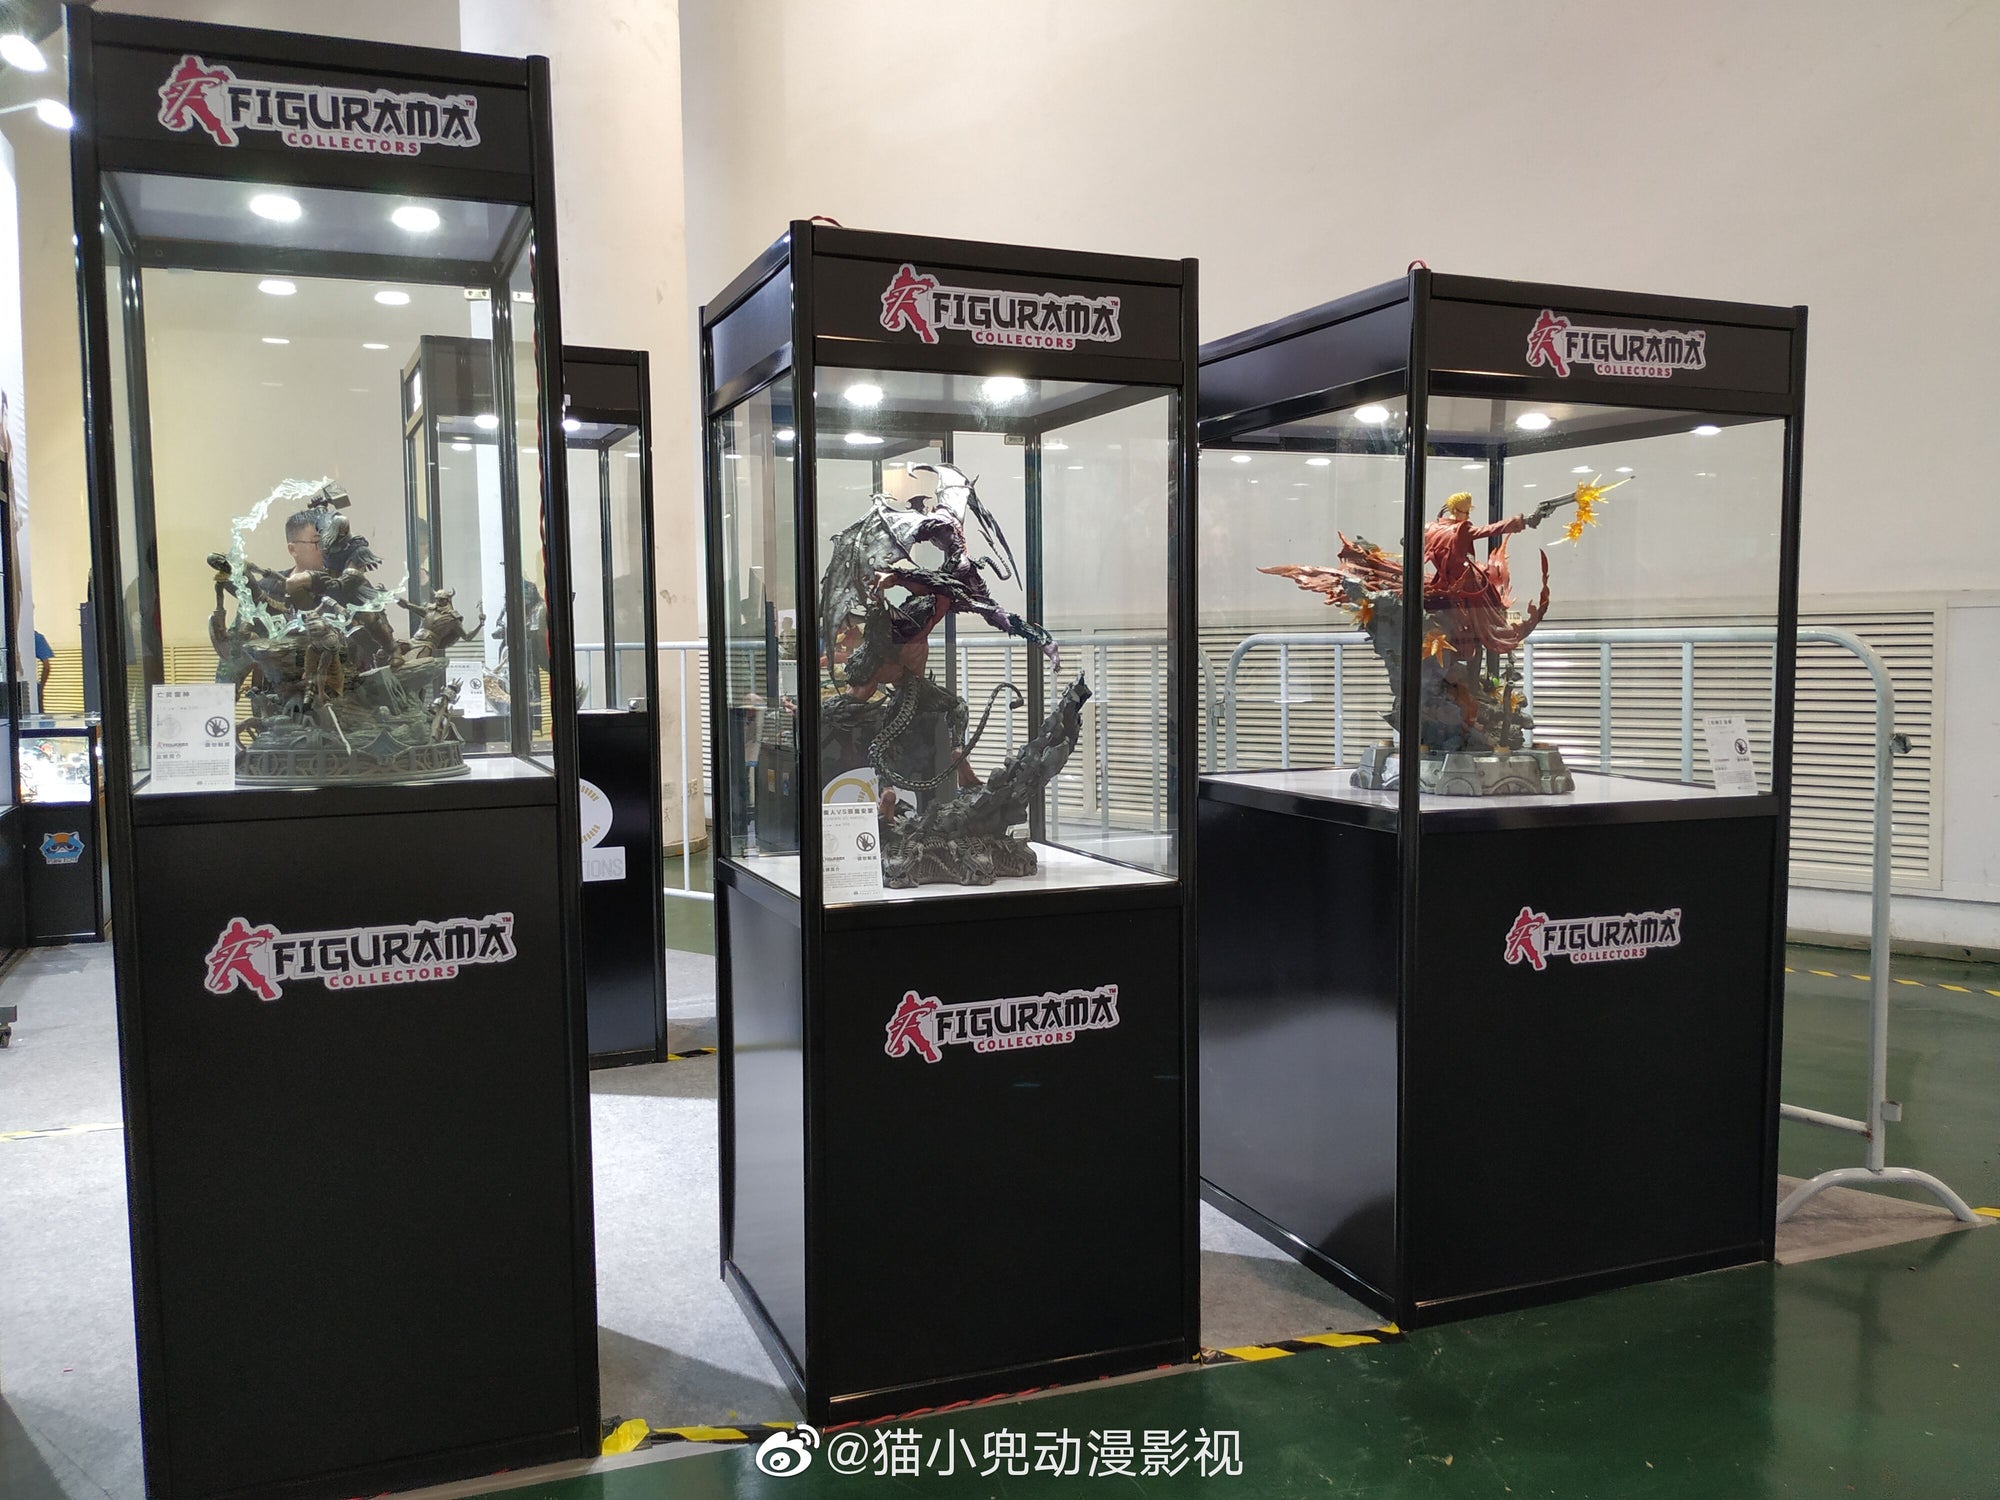 FIGURAMA COLLECTORS DRAWS CROWDS AT THE CHINA INTERNATIONAL CARTOON AND ANIME FESTIVAL